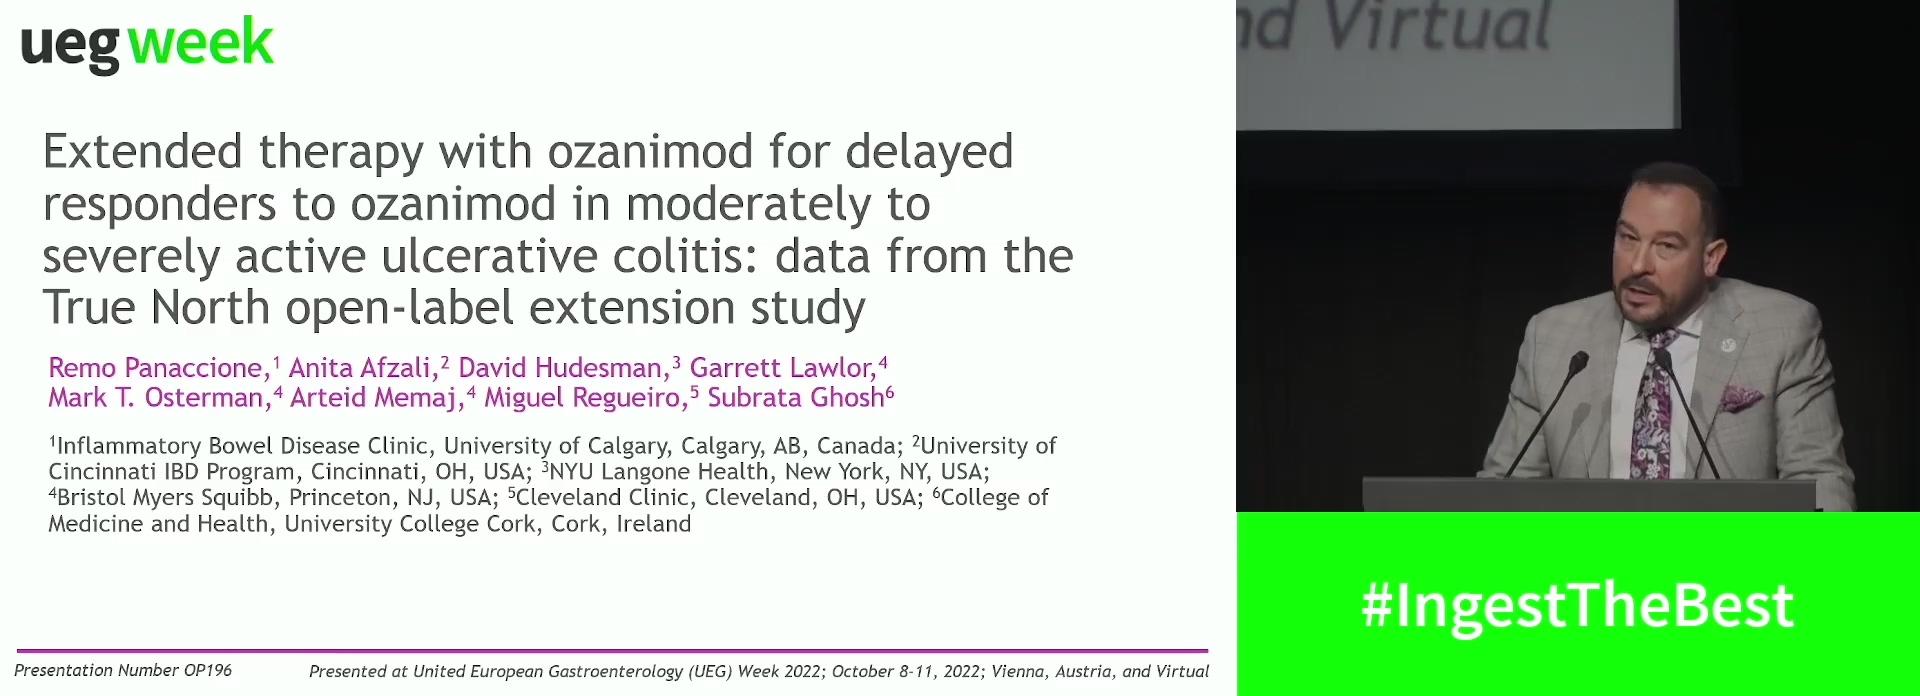 EXTENDED THERAPY WITH OZANIMOD FOR DELAYED RESPONDERS TO OZANIMOD IN MODERATELY TO SEVERELY ACTIVE ULCERATIVE COLITIS: DATA FROM THE TRUE NORTH OPEN-LABEL EXTENSION STUDY